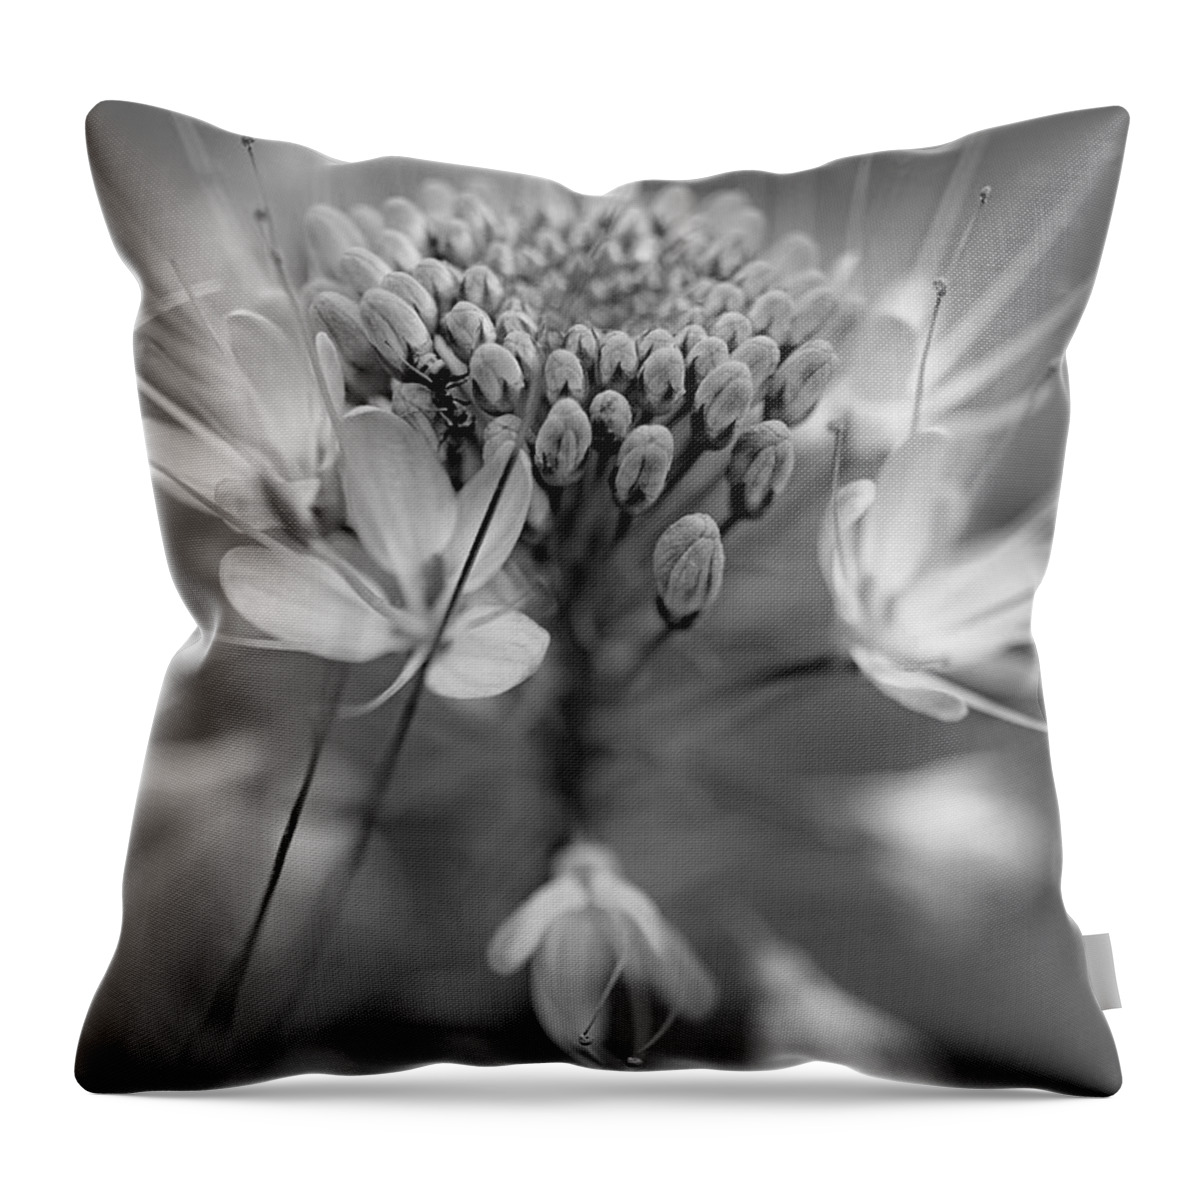 Disk1215 Throw Pillow featuring the photograph Rocky Mountain Bee Plant Abstract by Tim Fitzharris